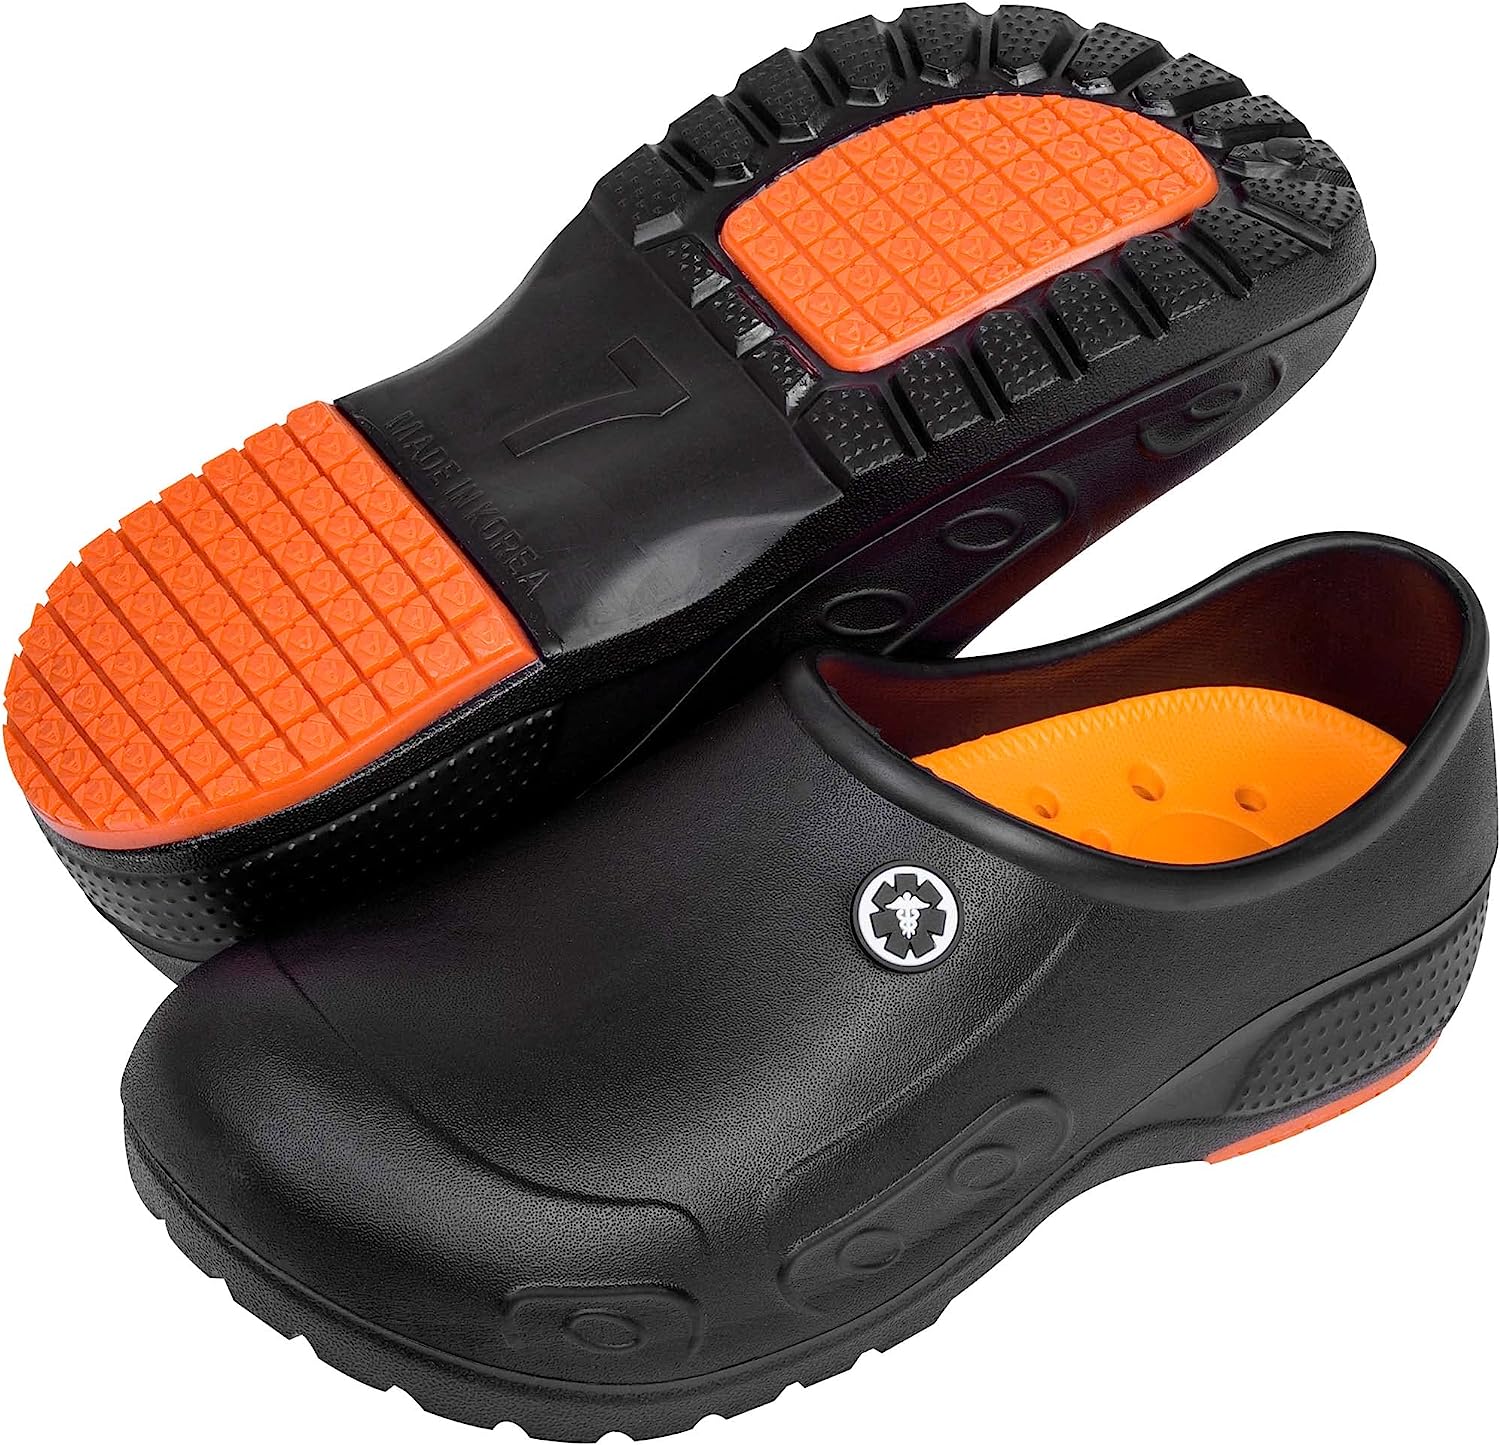 YUNGPRIME Men's and Women's Slip-Resistant Work Shoes [...]